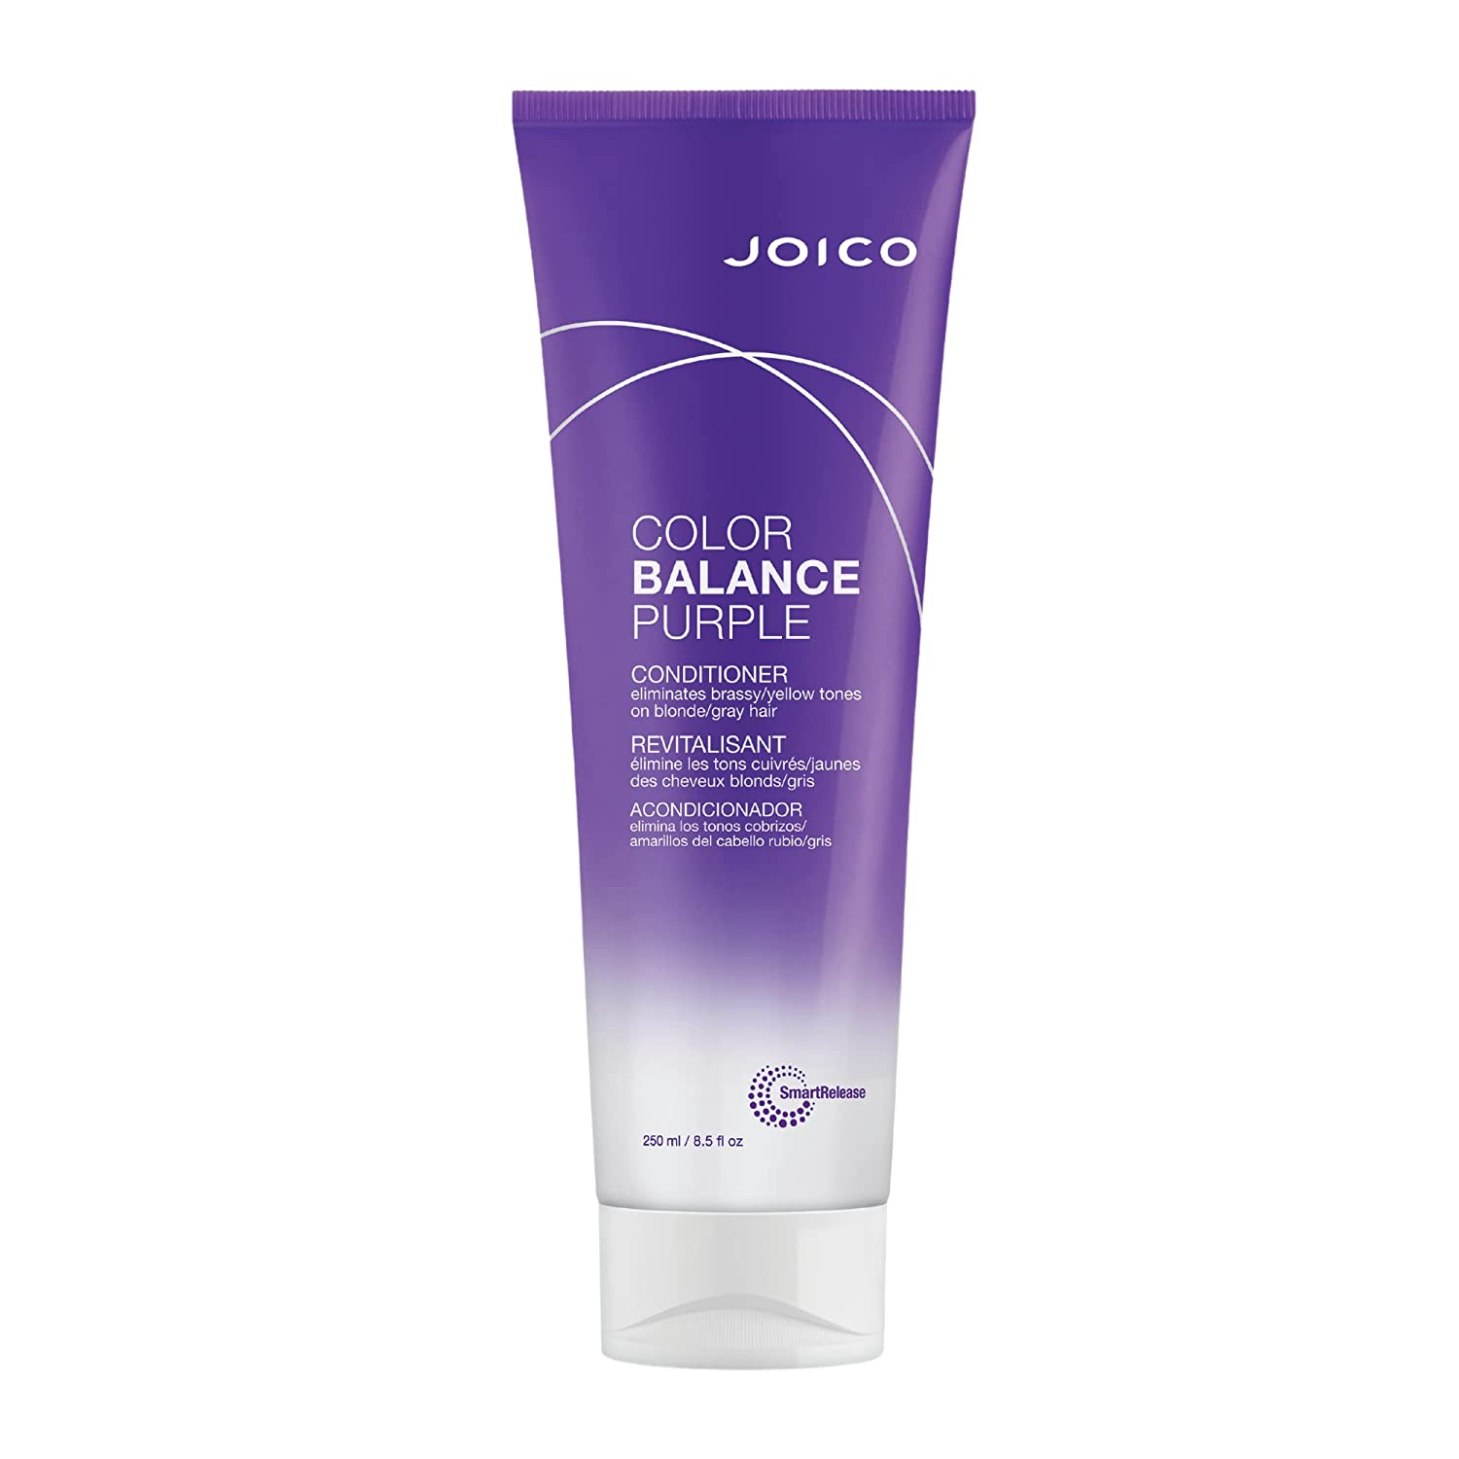 joico color balance purple conditioner, one of the best conditioners for gray hair